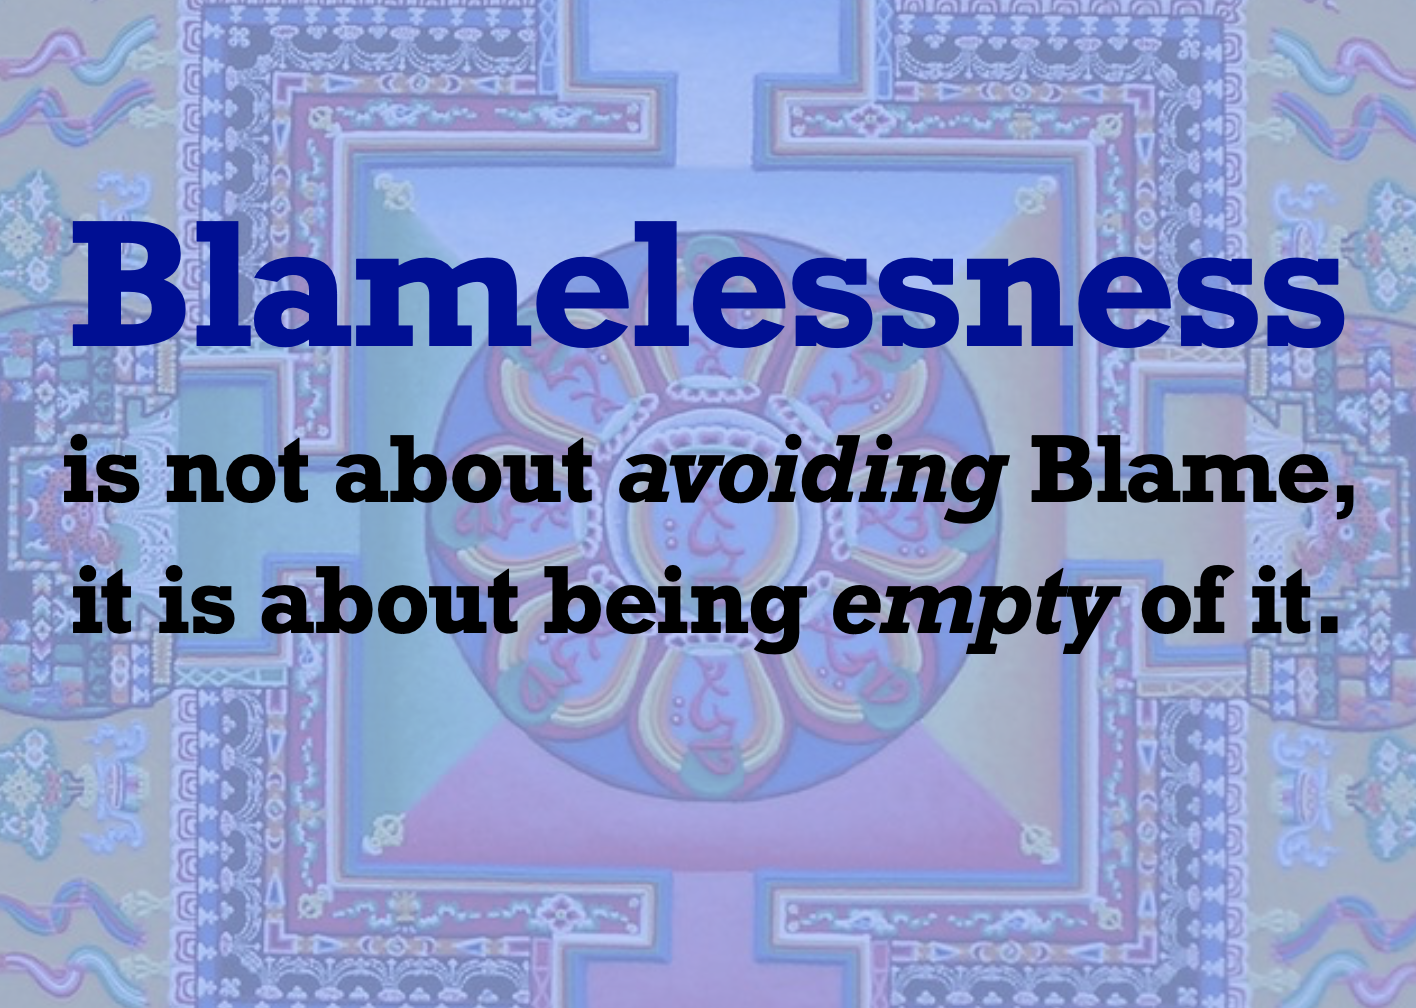 Blamelessness is not about avoiding Blame, it is about being empty of it.